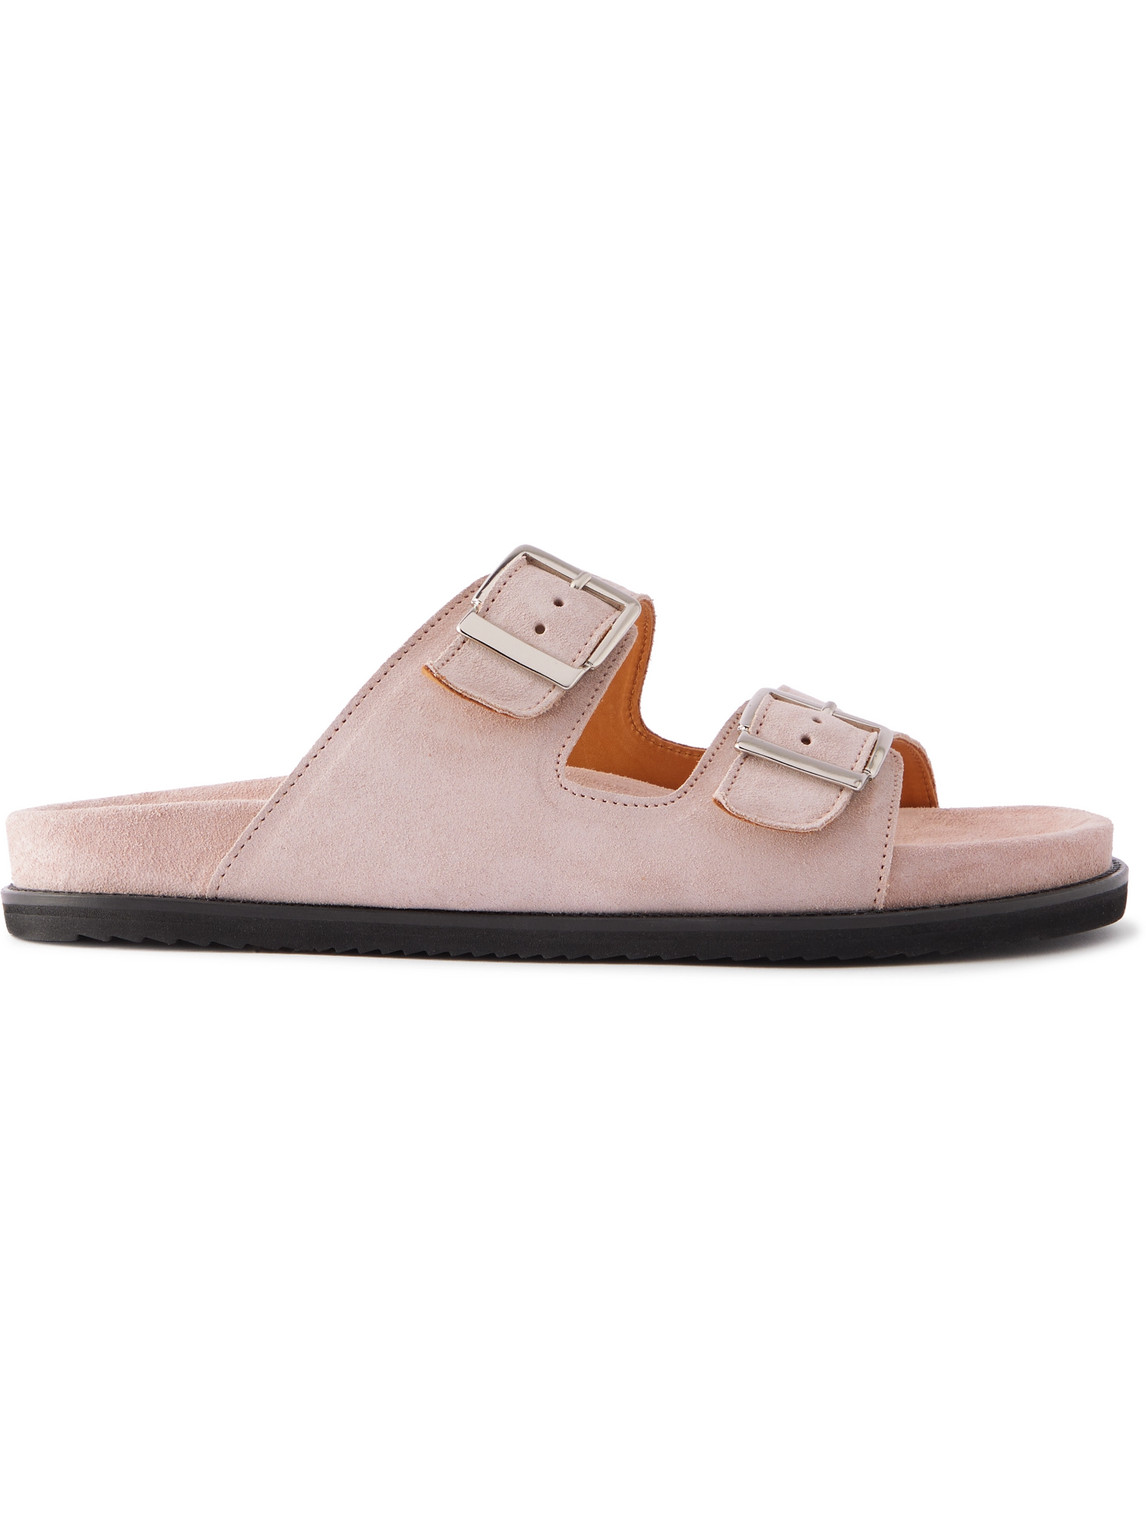 Mr P David Regenerated Suede By Evolo® Sandals In Pink